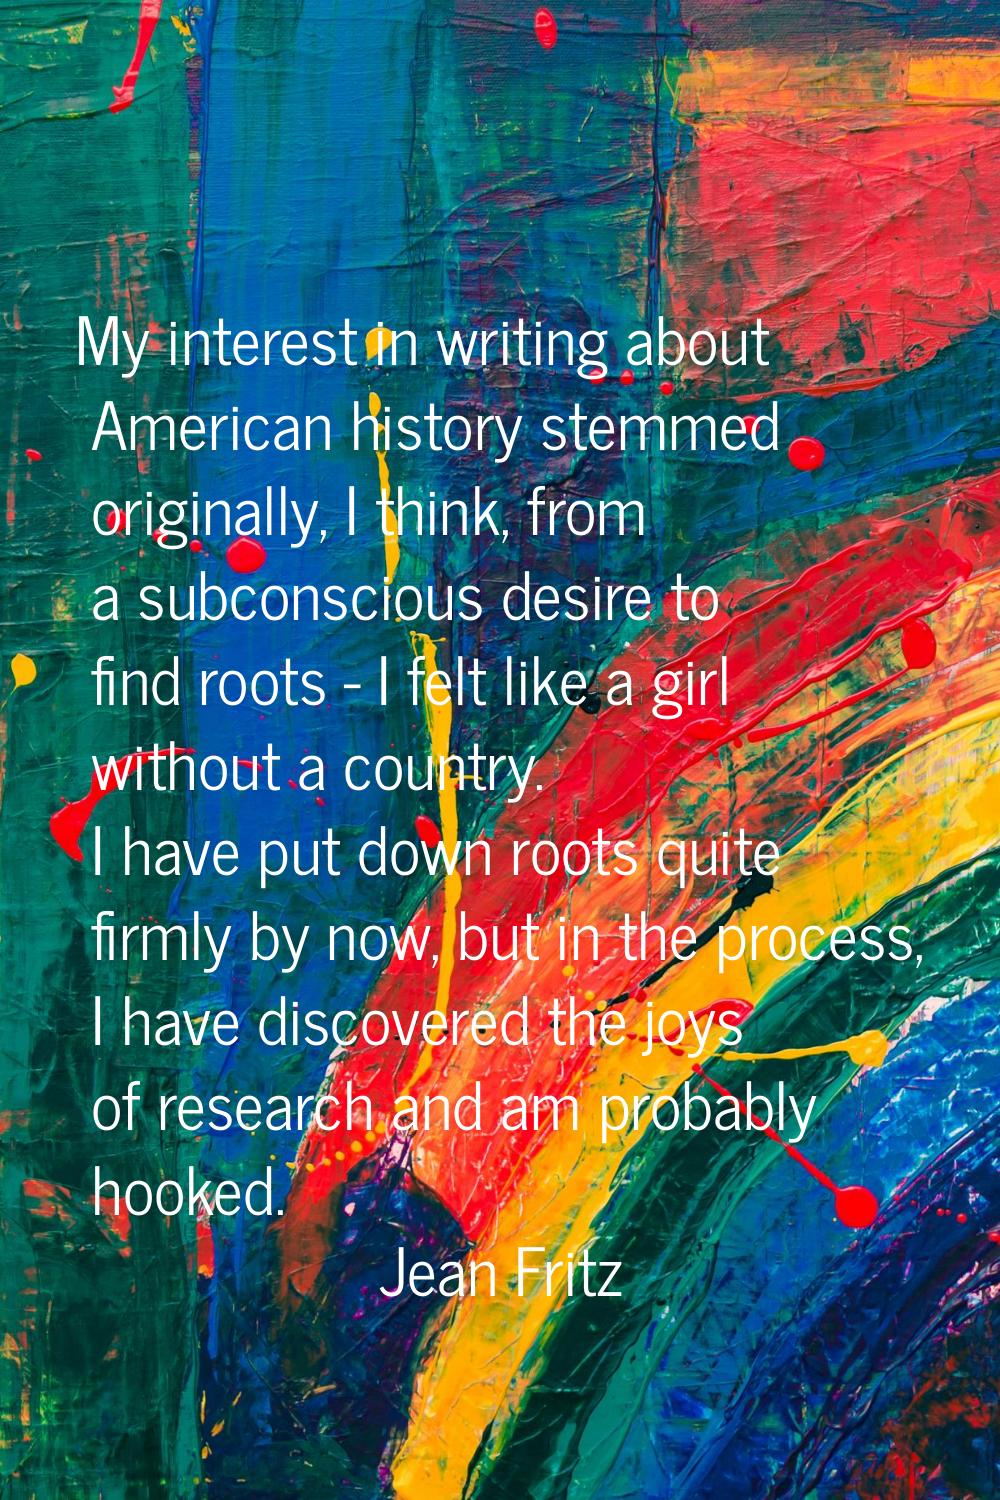 My interest in writing about American history stemmed originally, I think, from a subconscious desi